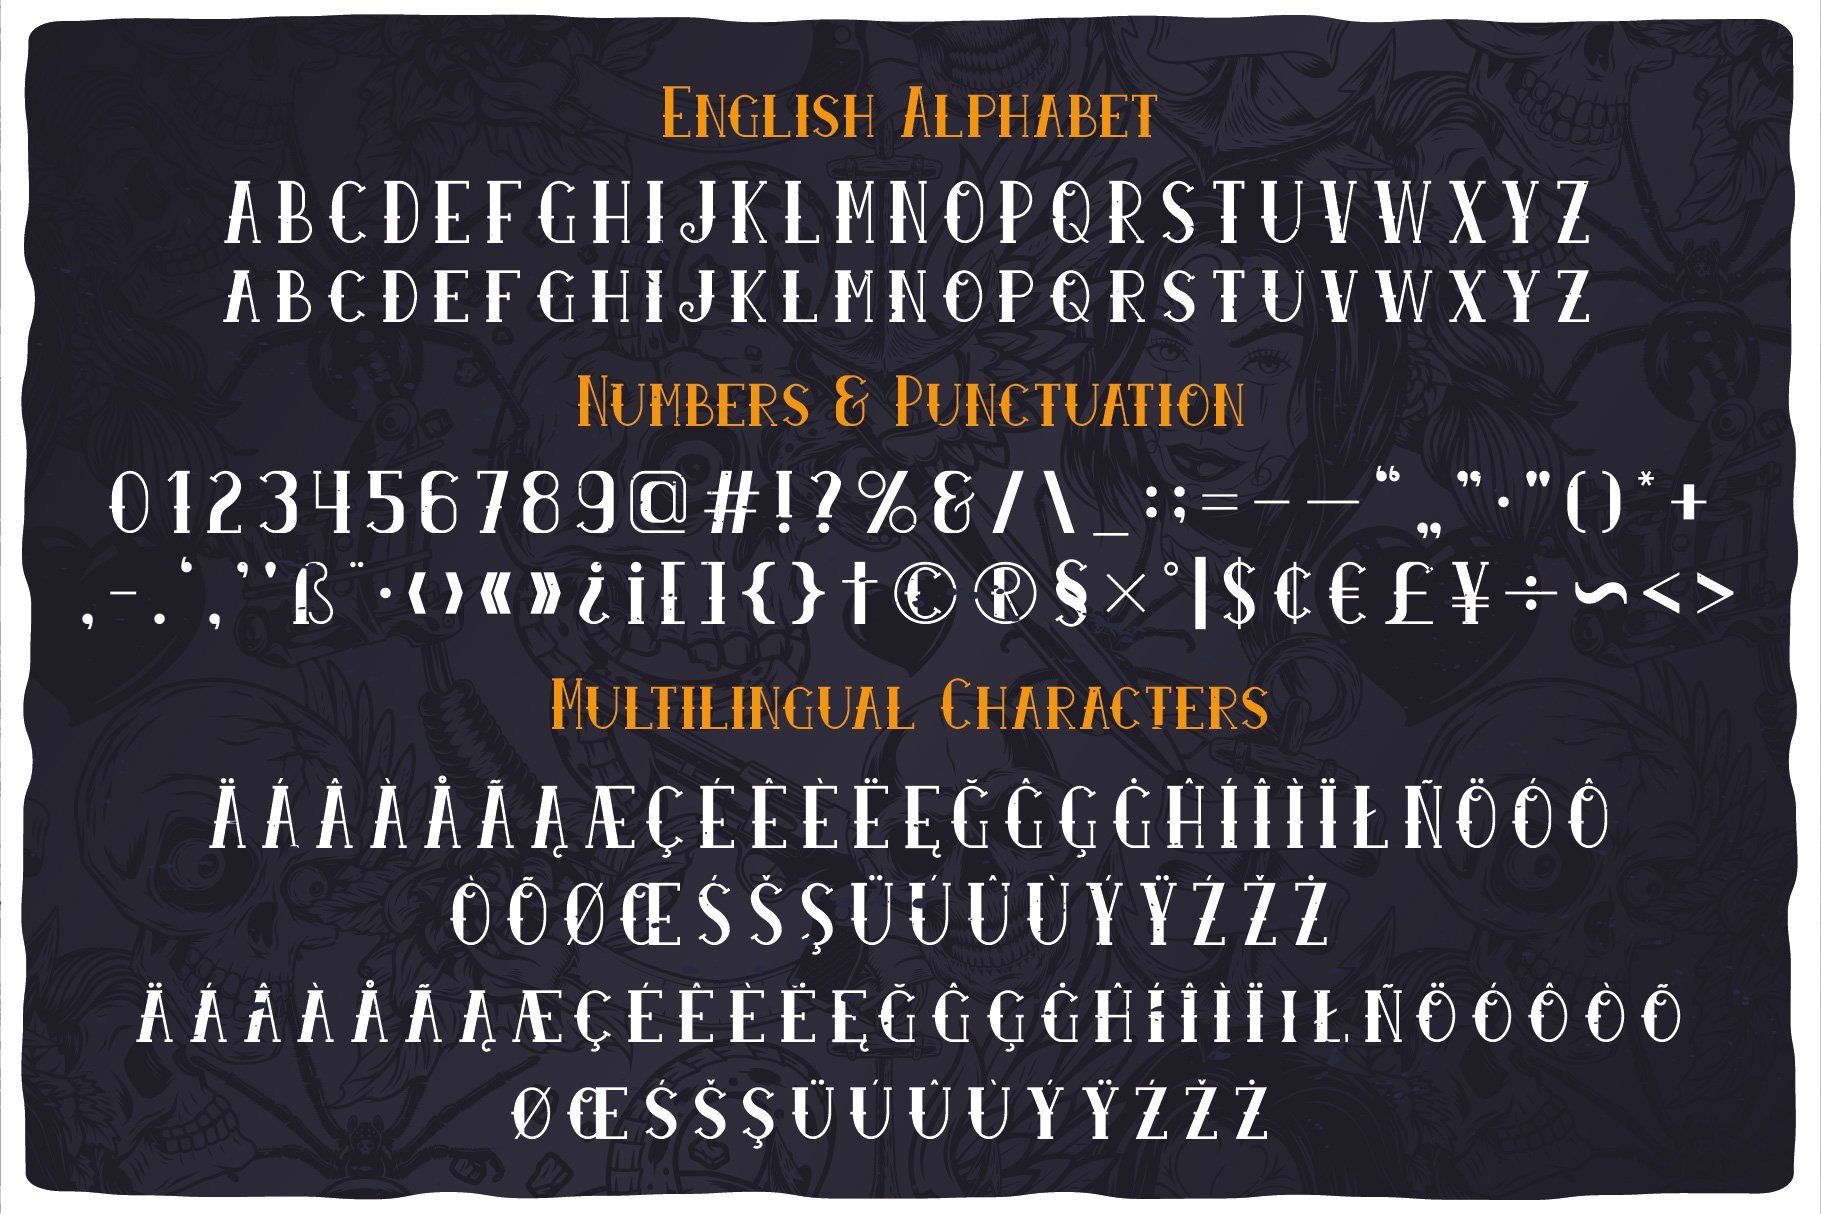 This is the entire font and how it will be displayed.